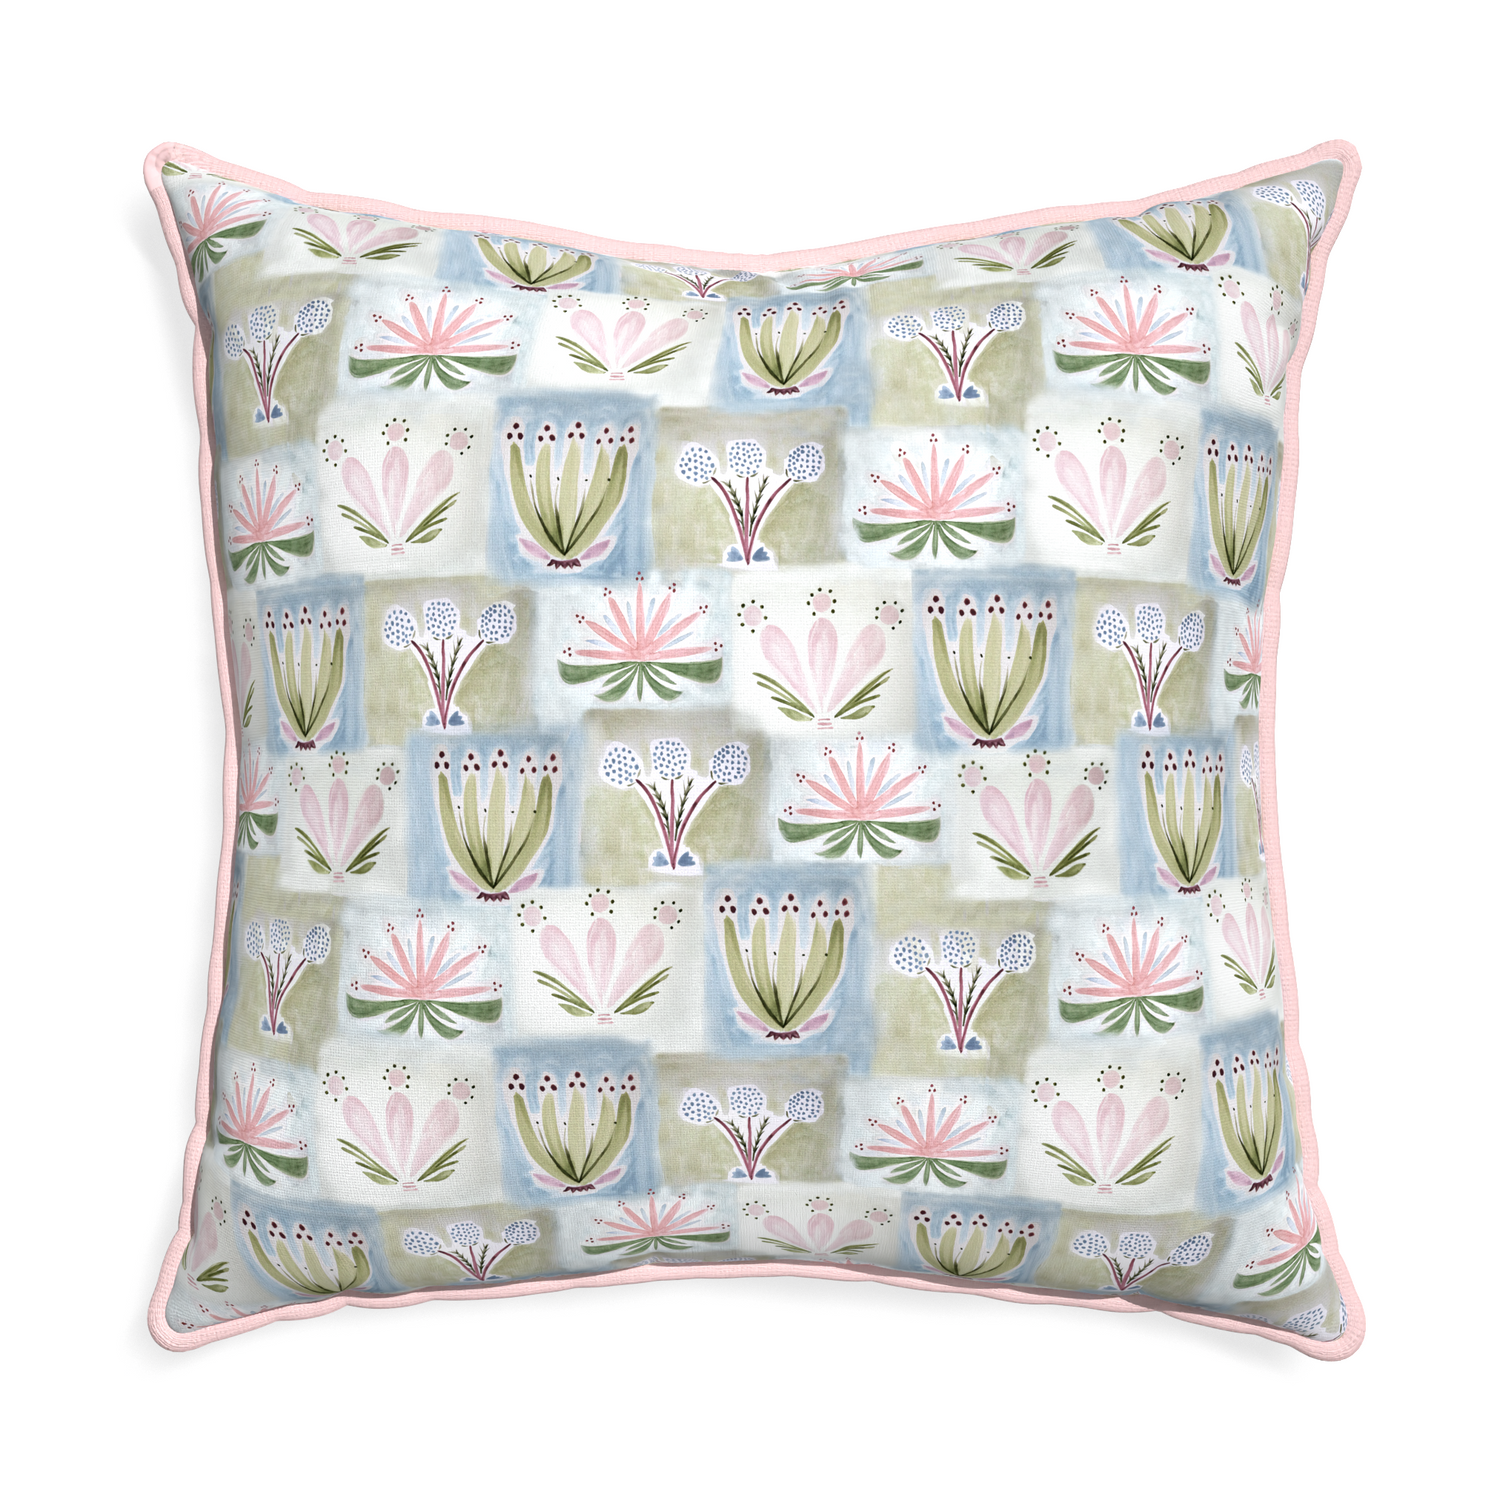 Euro-sham harper custom hand-painted floralpillow with petal piping on white background